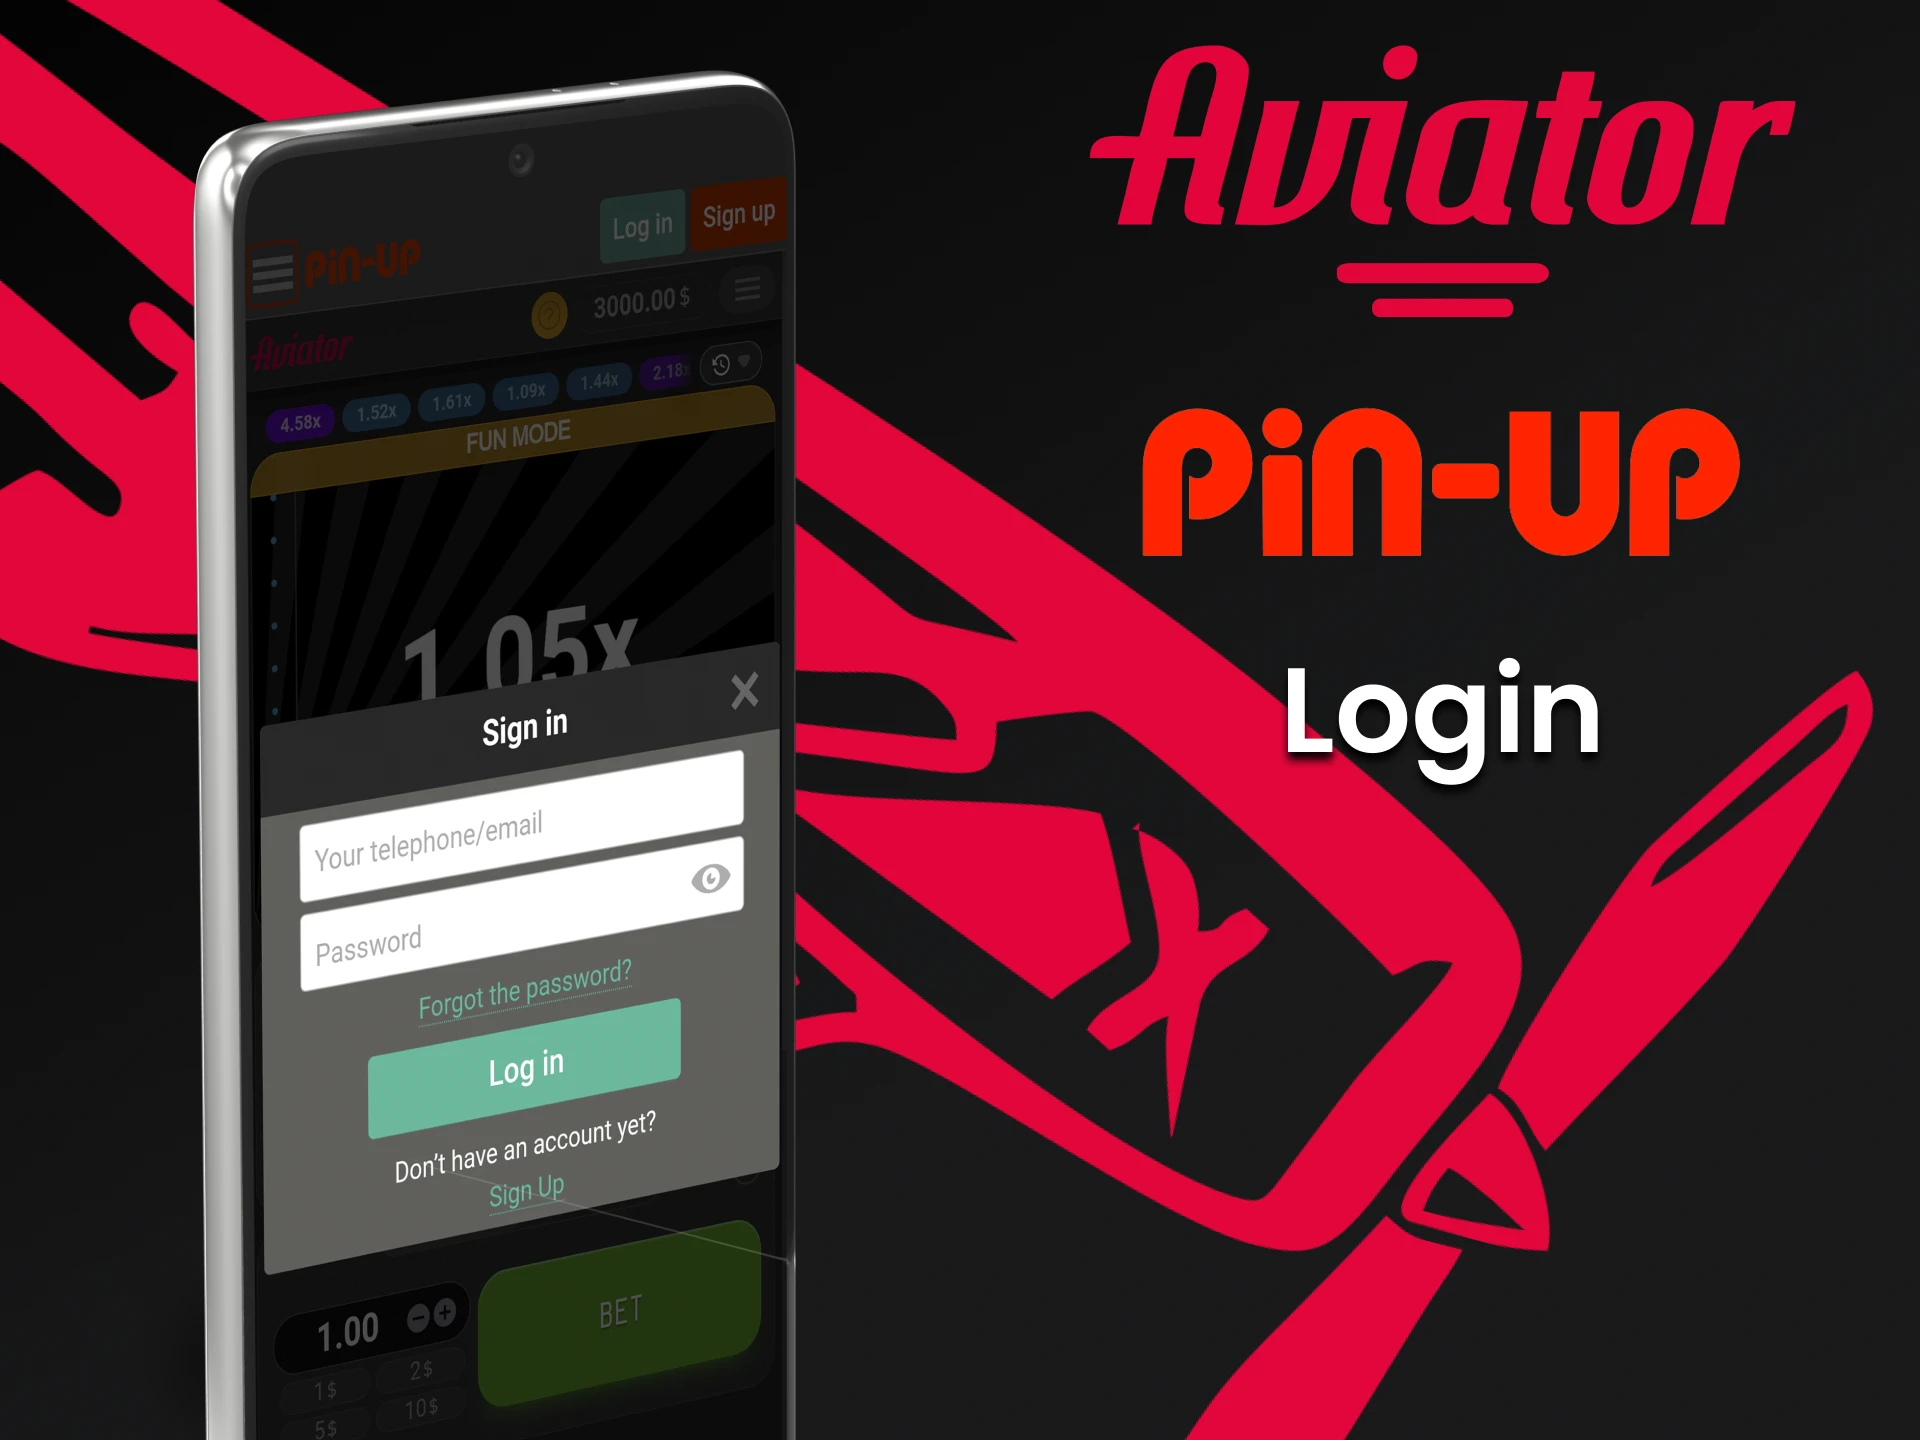 Sign in to your Pin Up account to play Aviator.